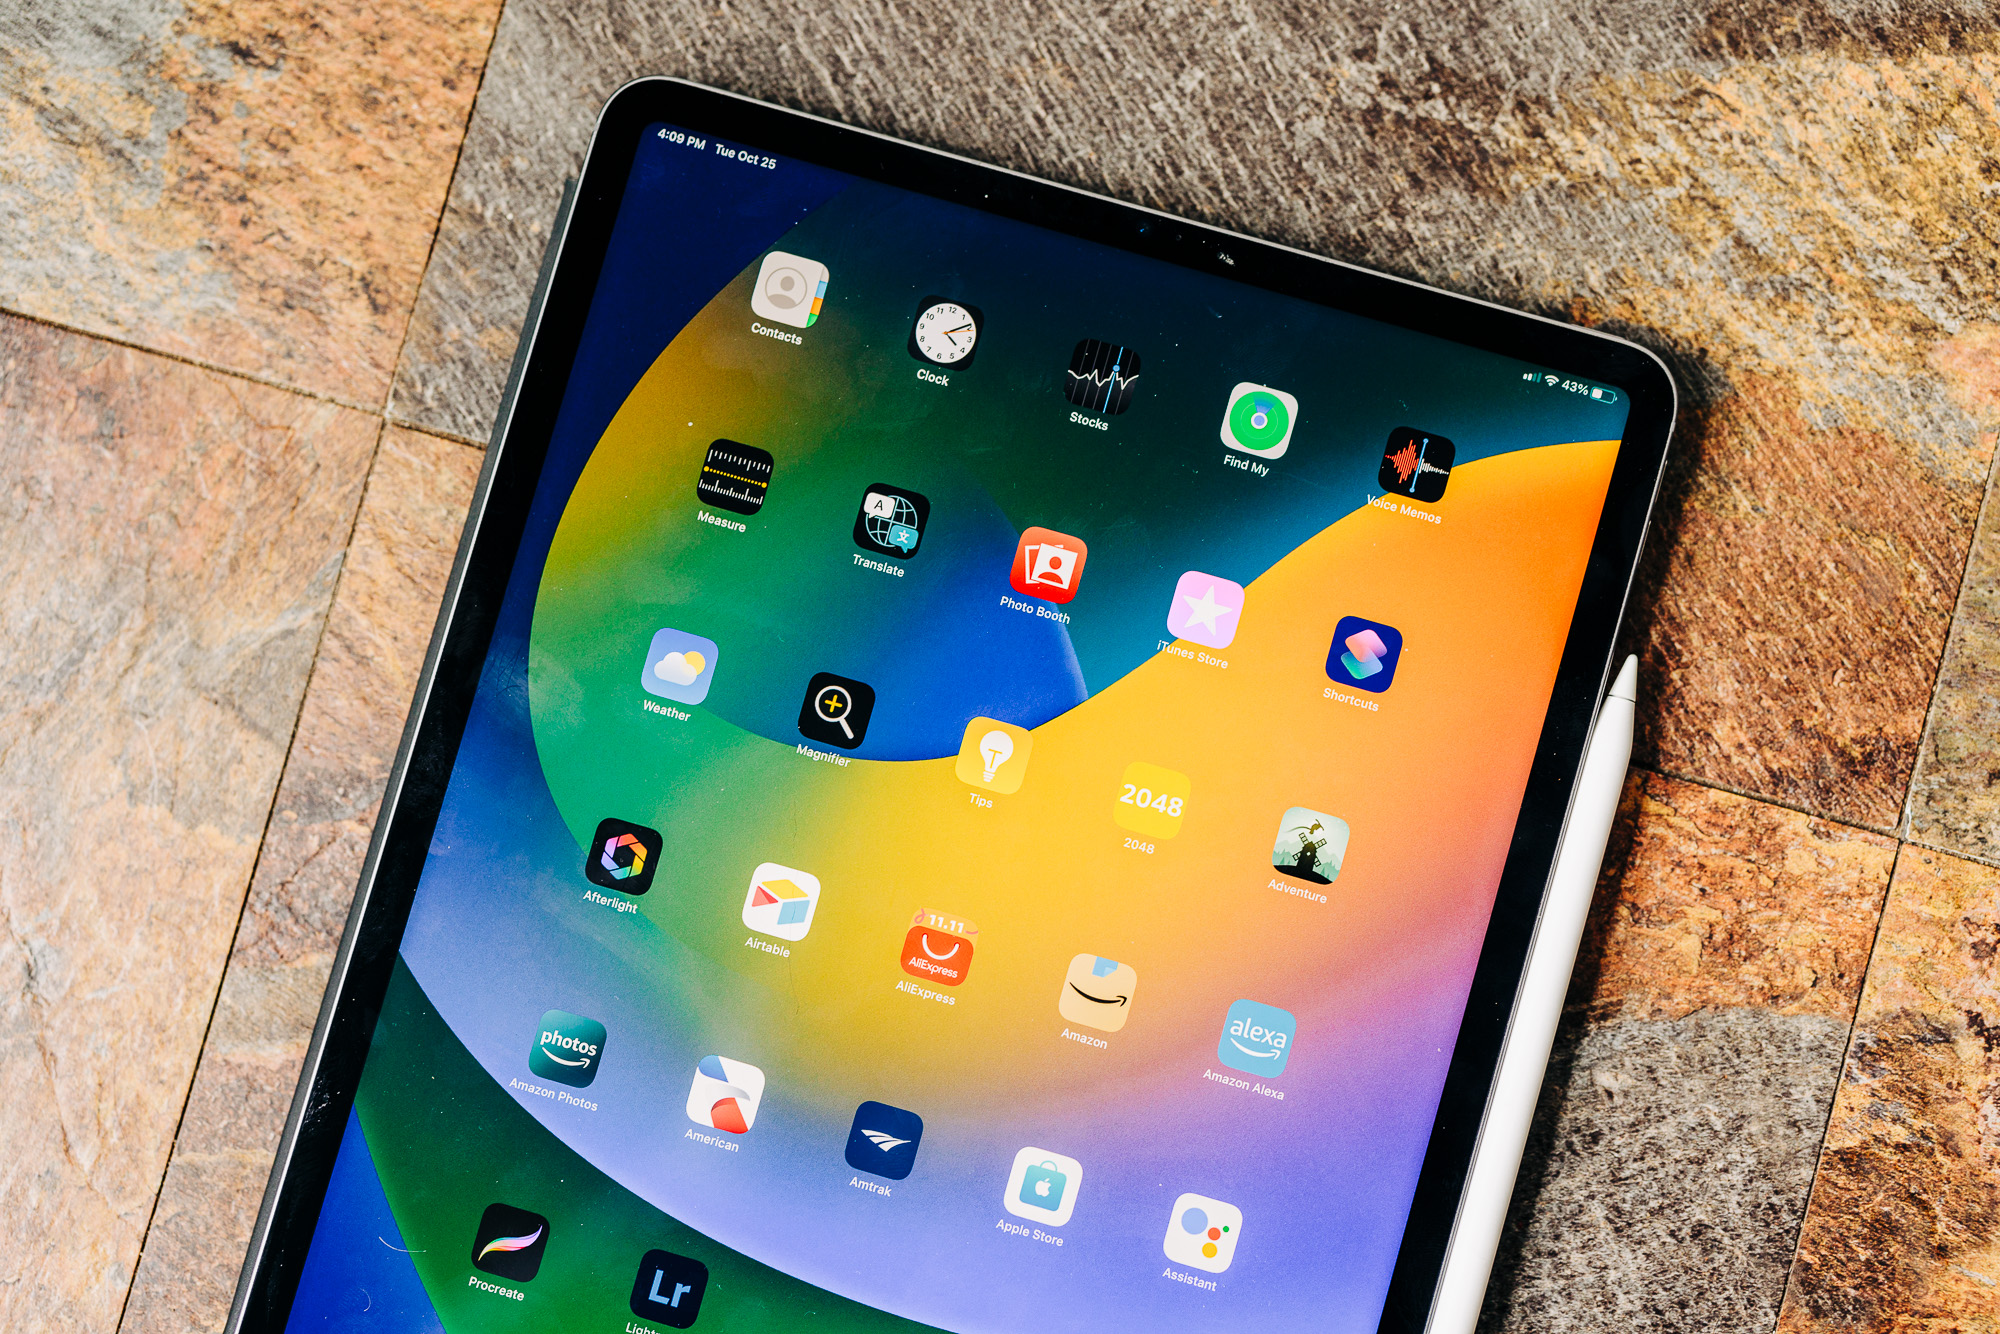 iPad Air (2022) Review: The Power of the Apple M1